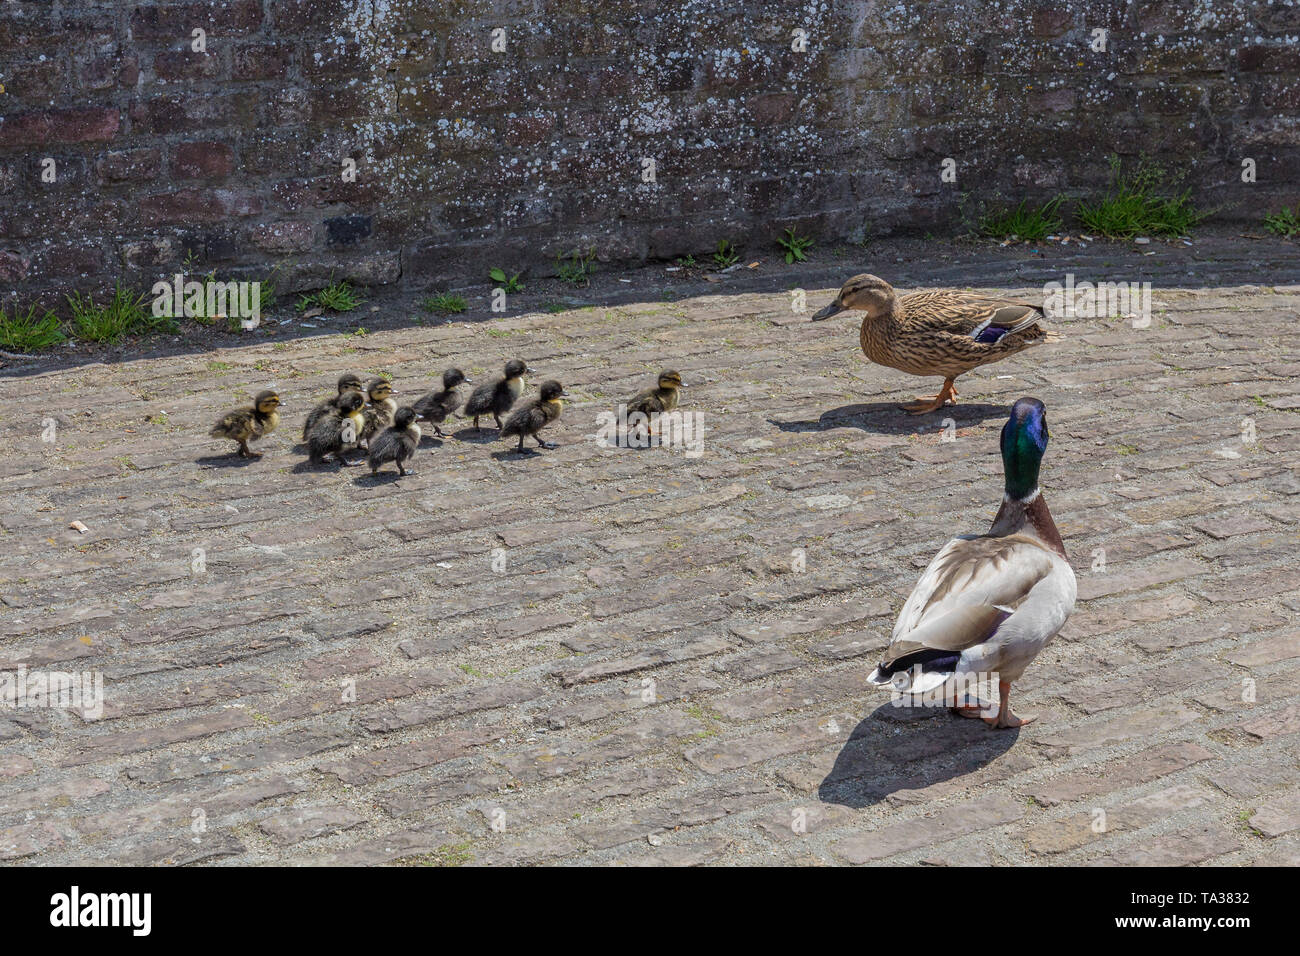 Ducks parenting over their baby ducks on a fortified city wall in Maastricht at the end of spring and the start of summer Stock Photo